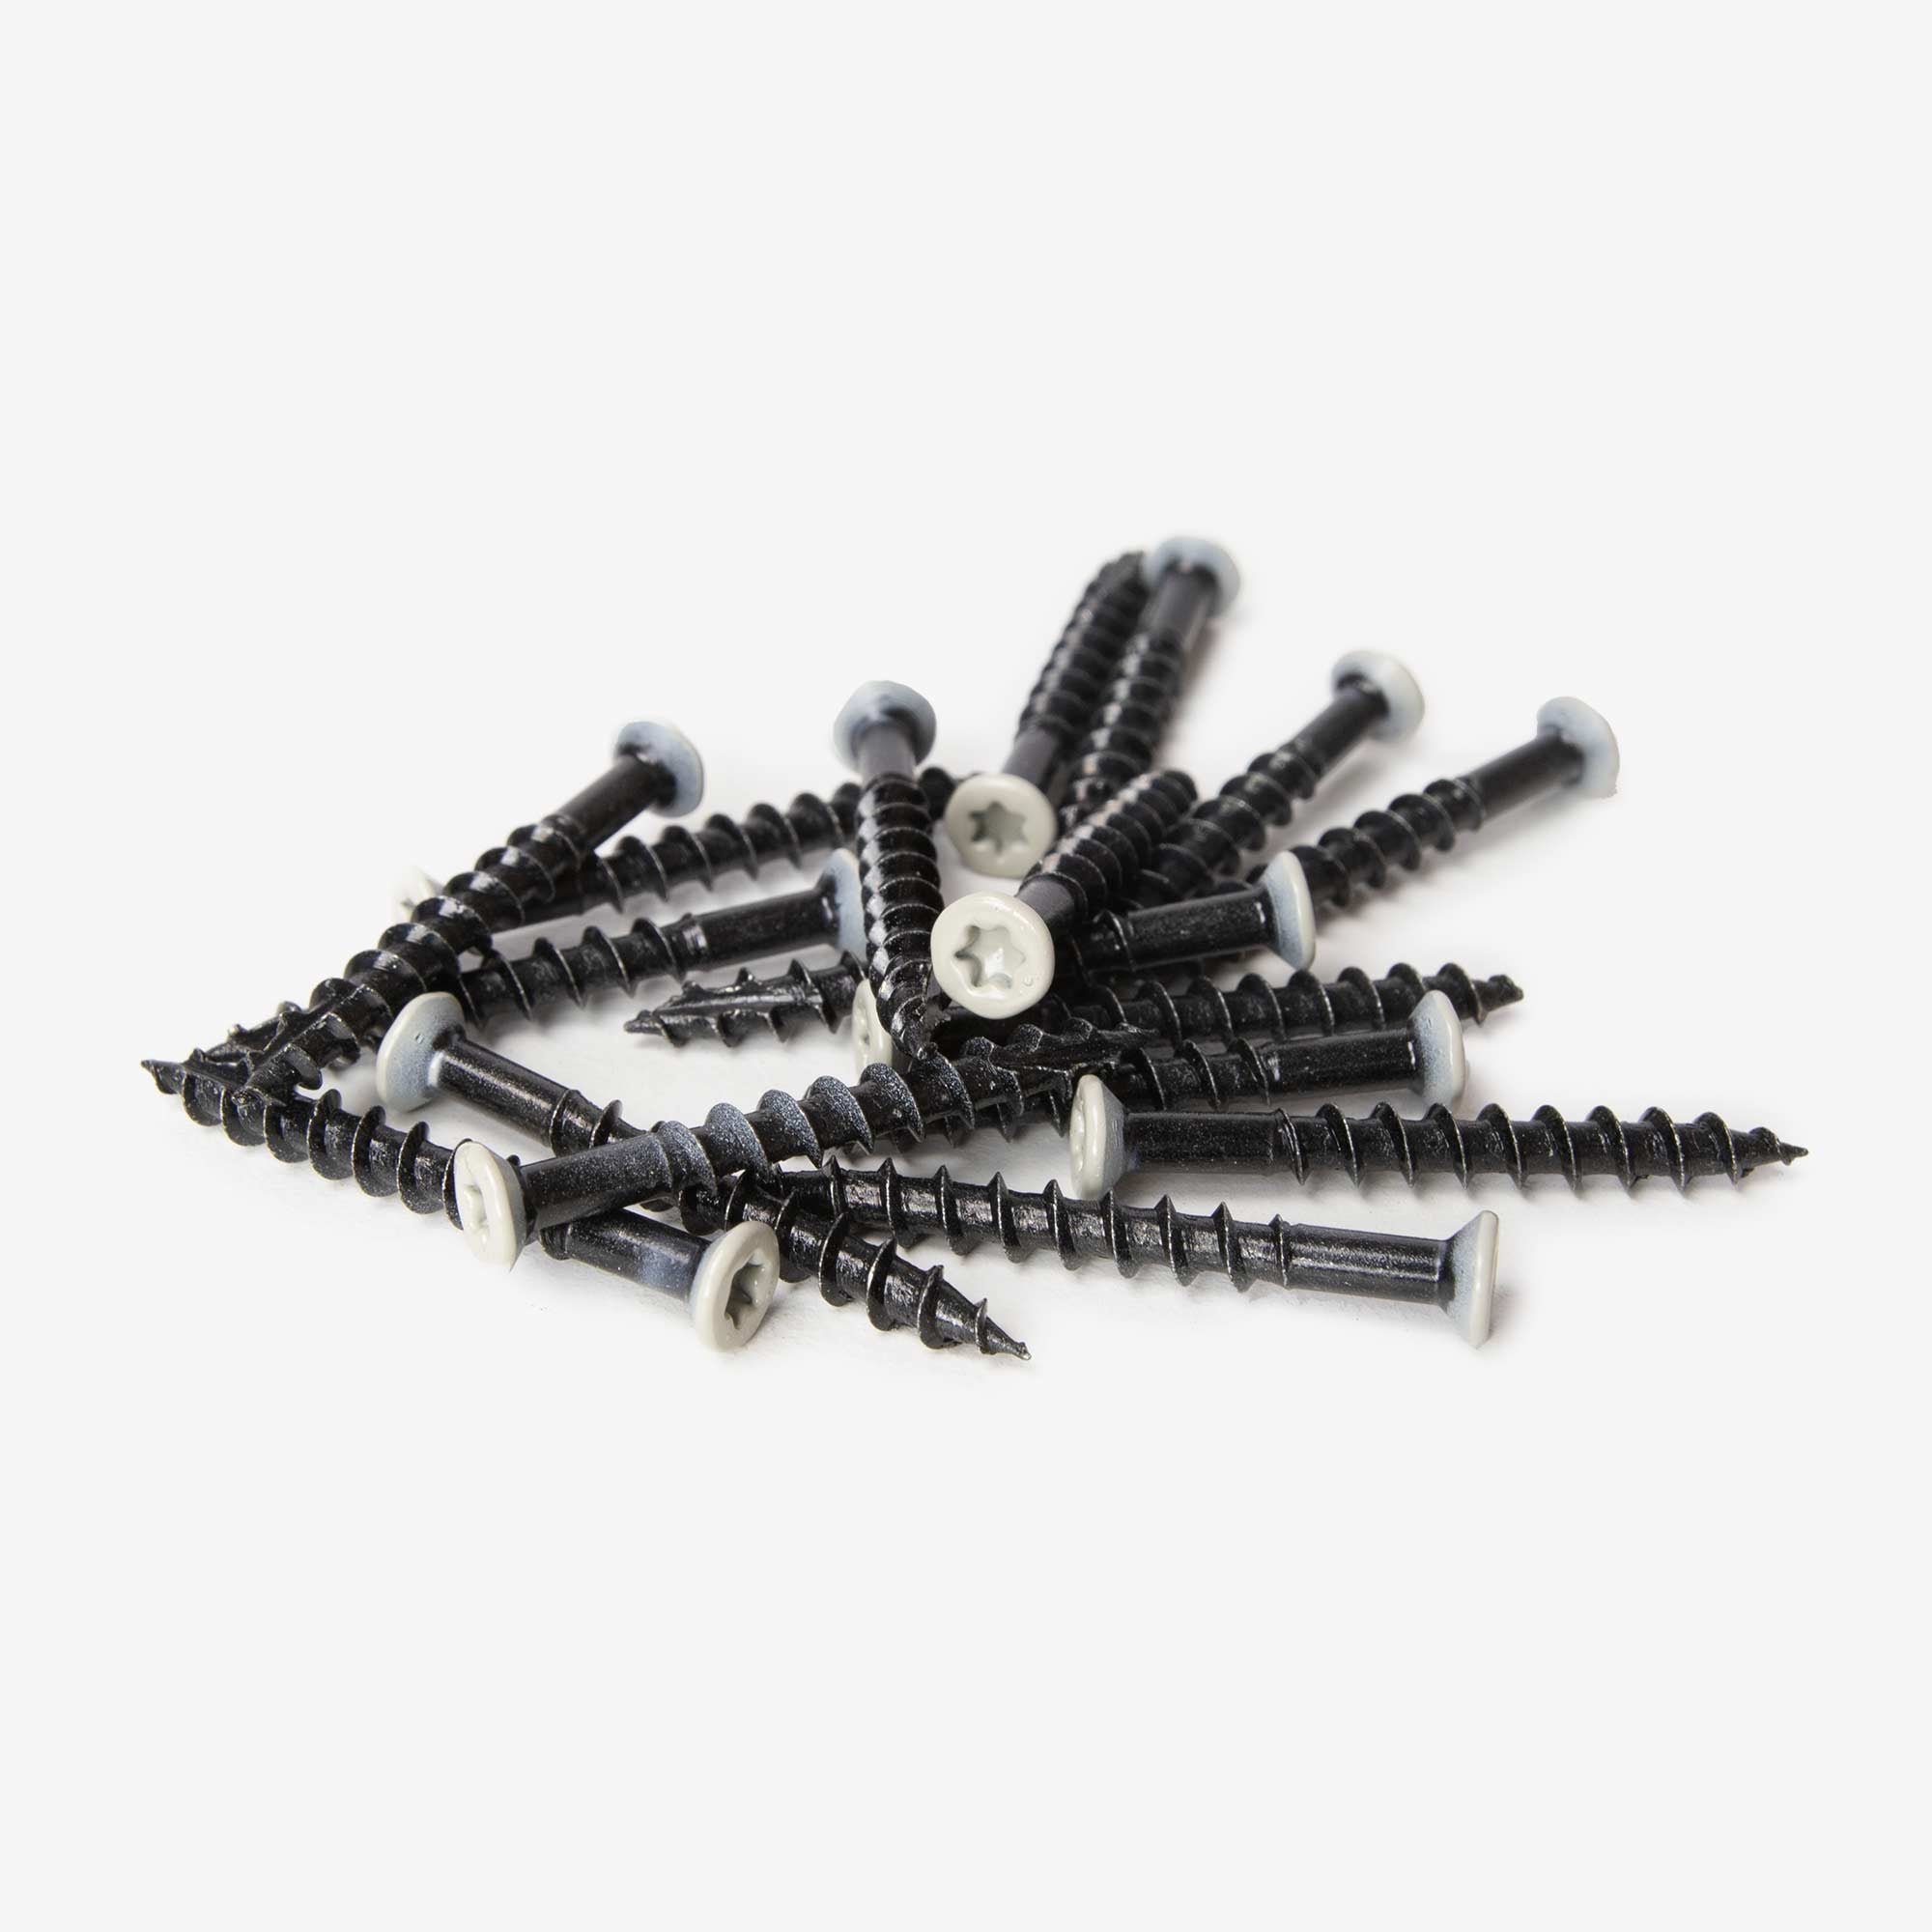 Coloured Screws - 100 Pack / Silver Birch/Marble